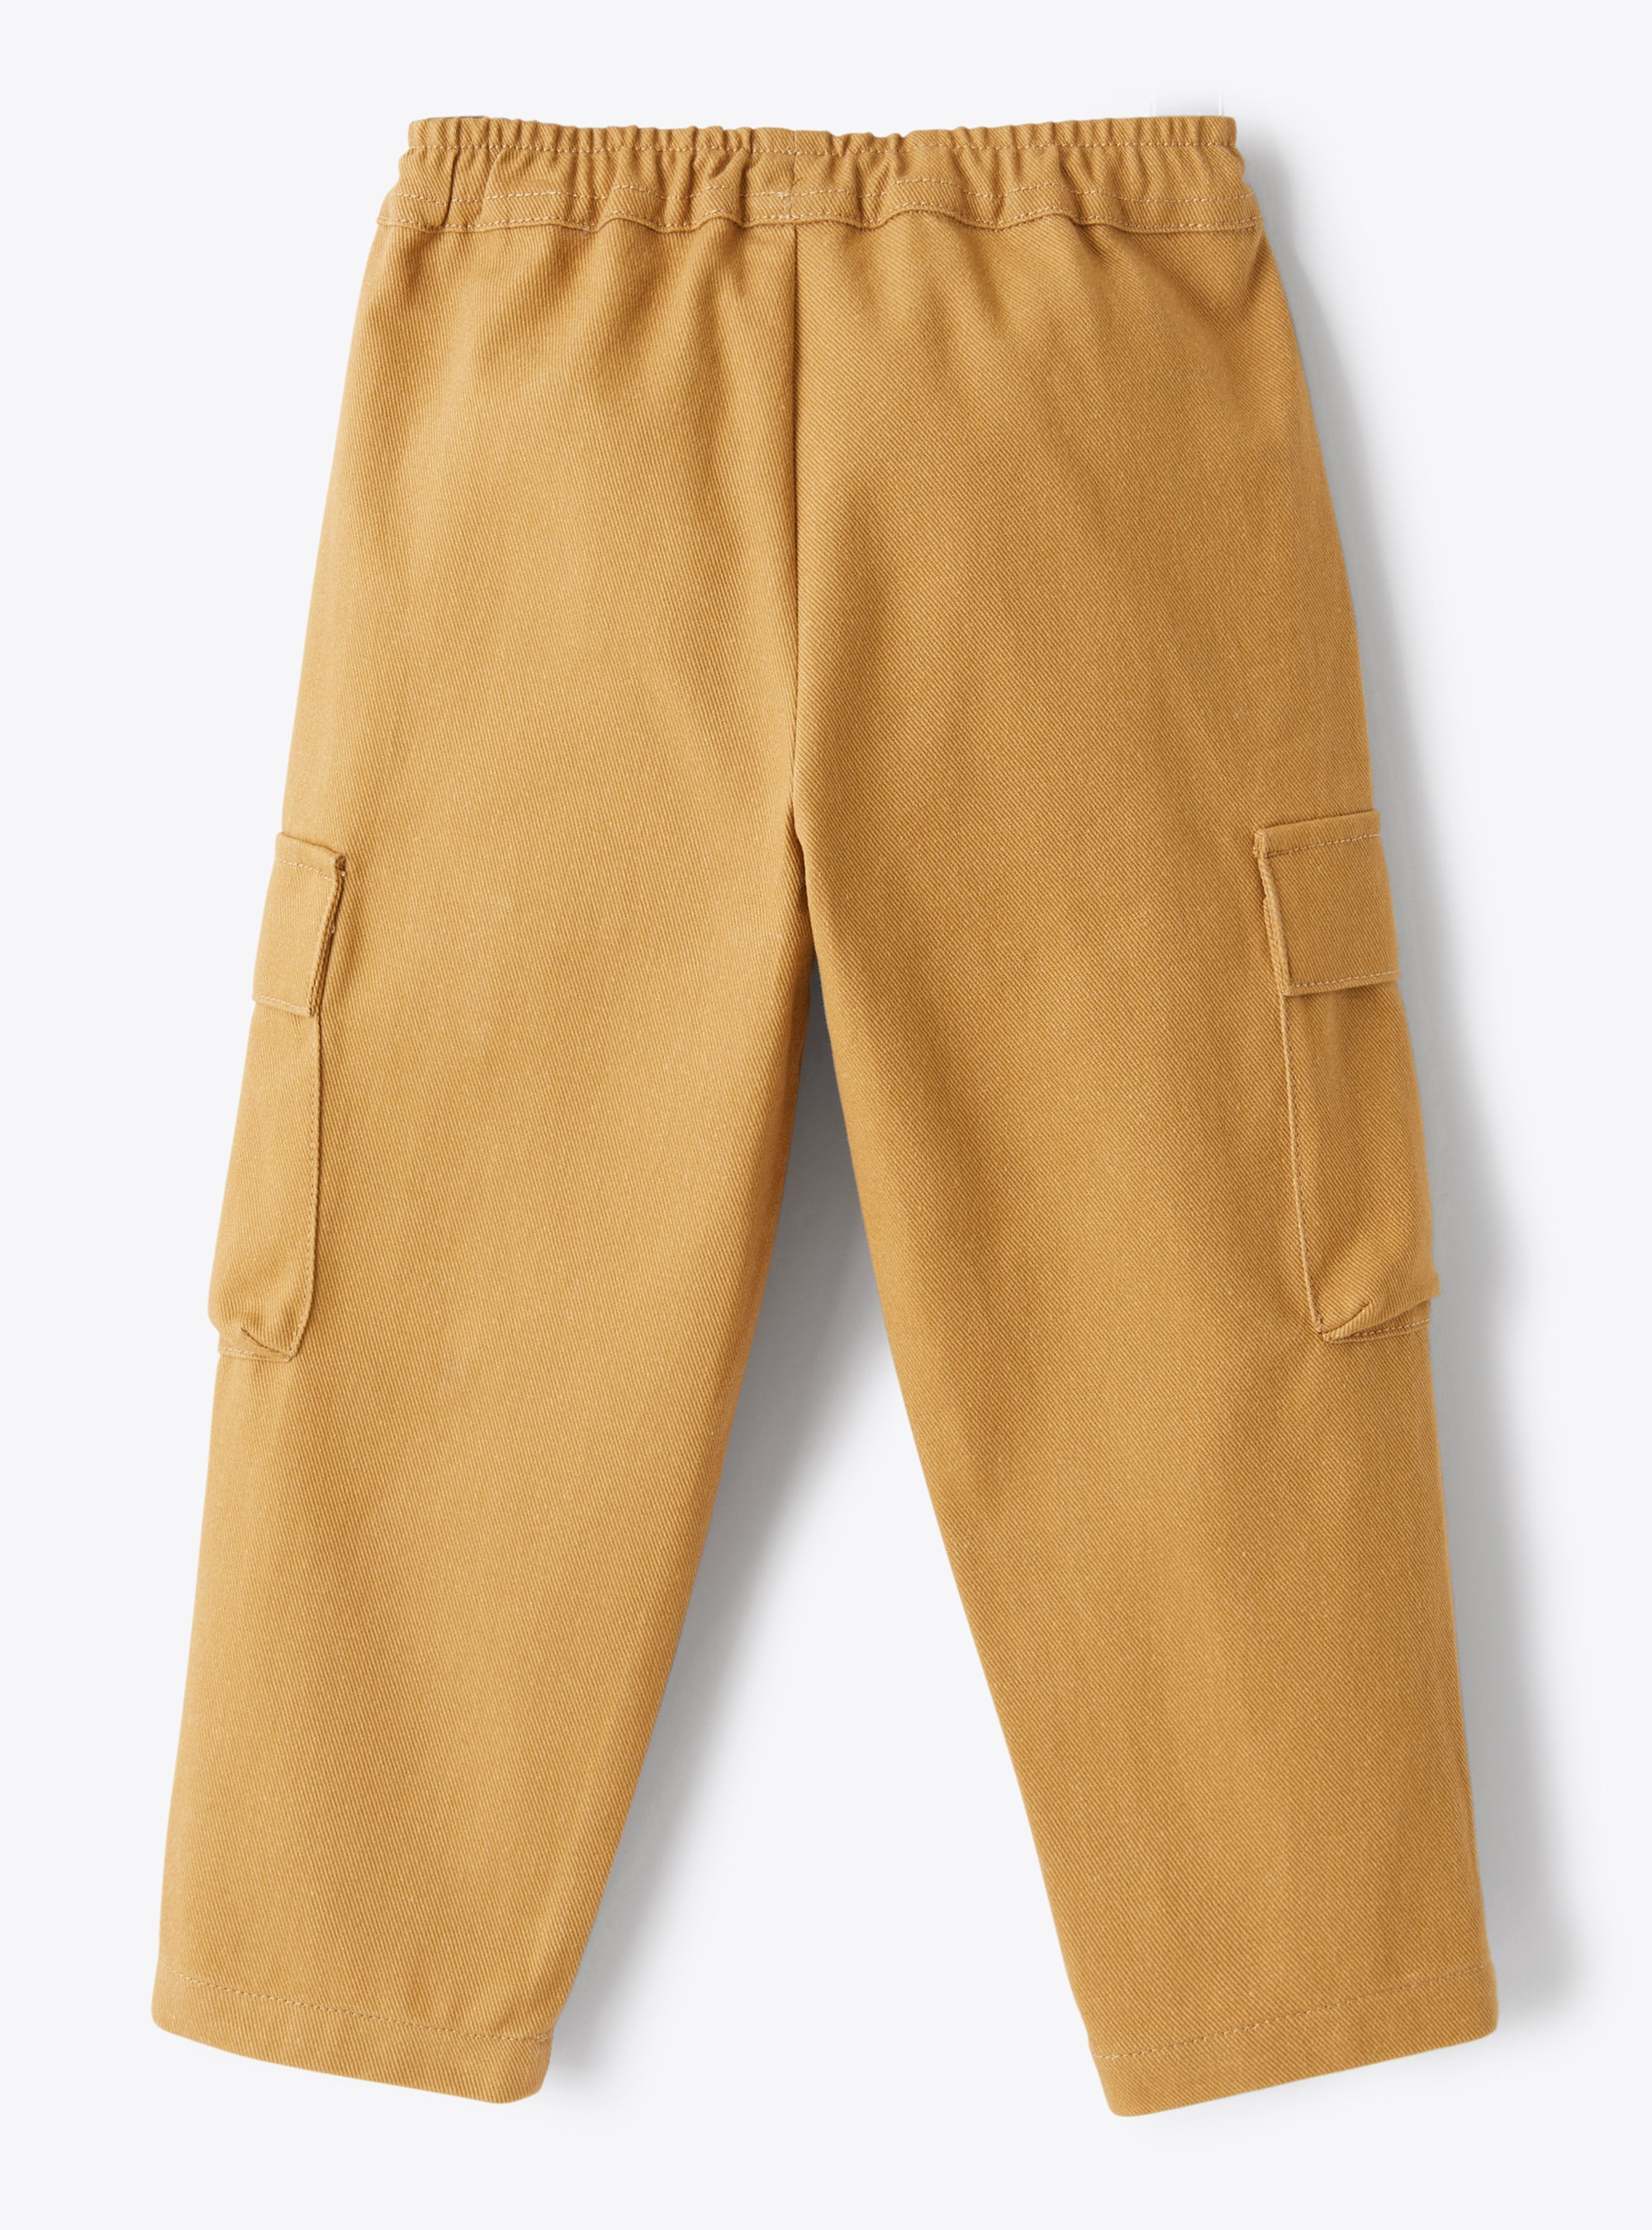 Cargo pants in brown bull cotton - Brown | Il Gufo